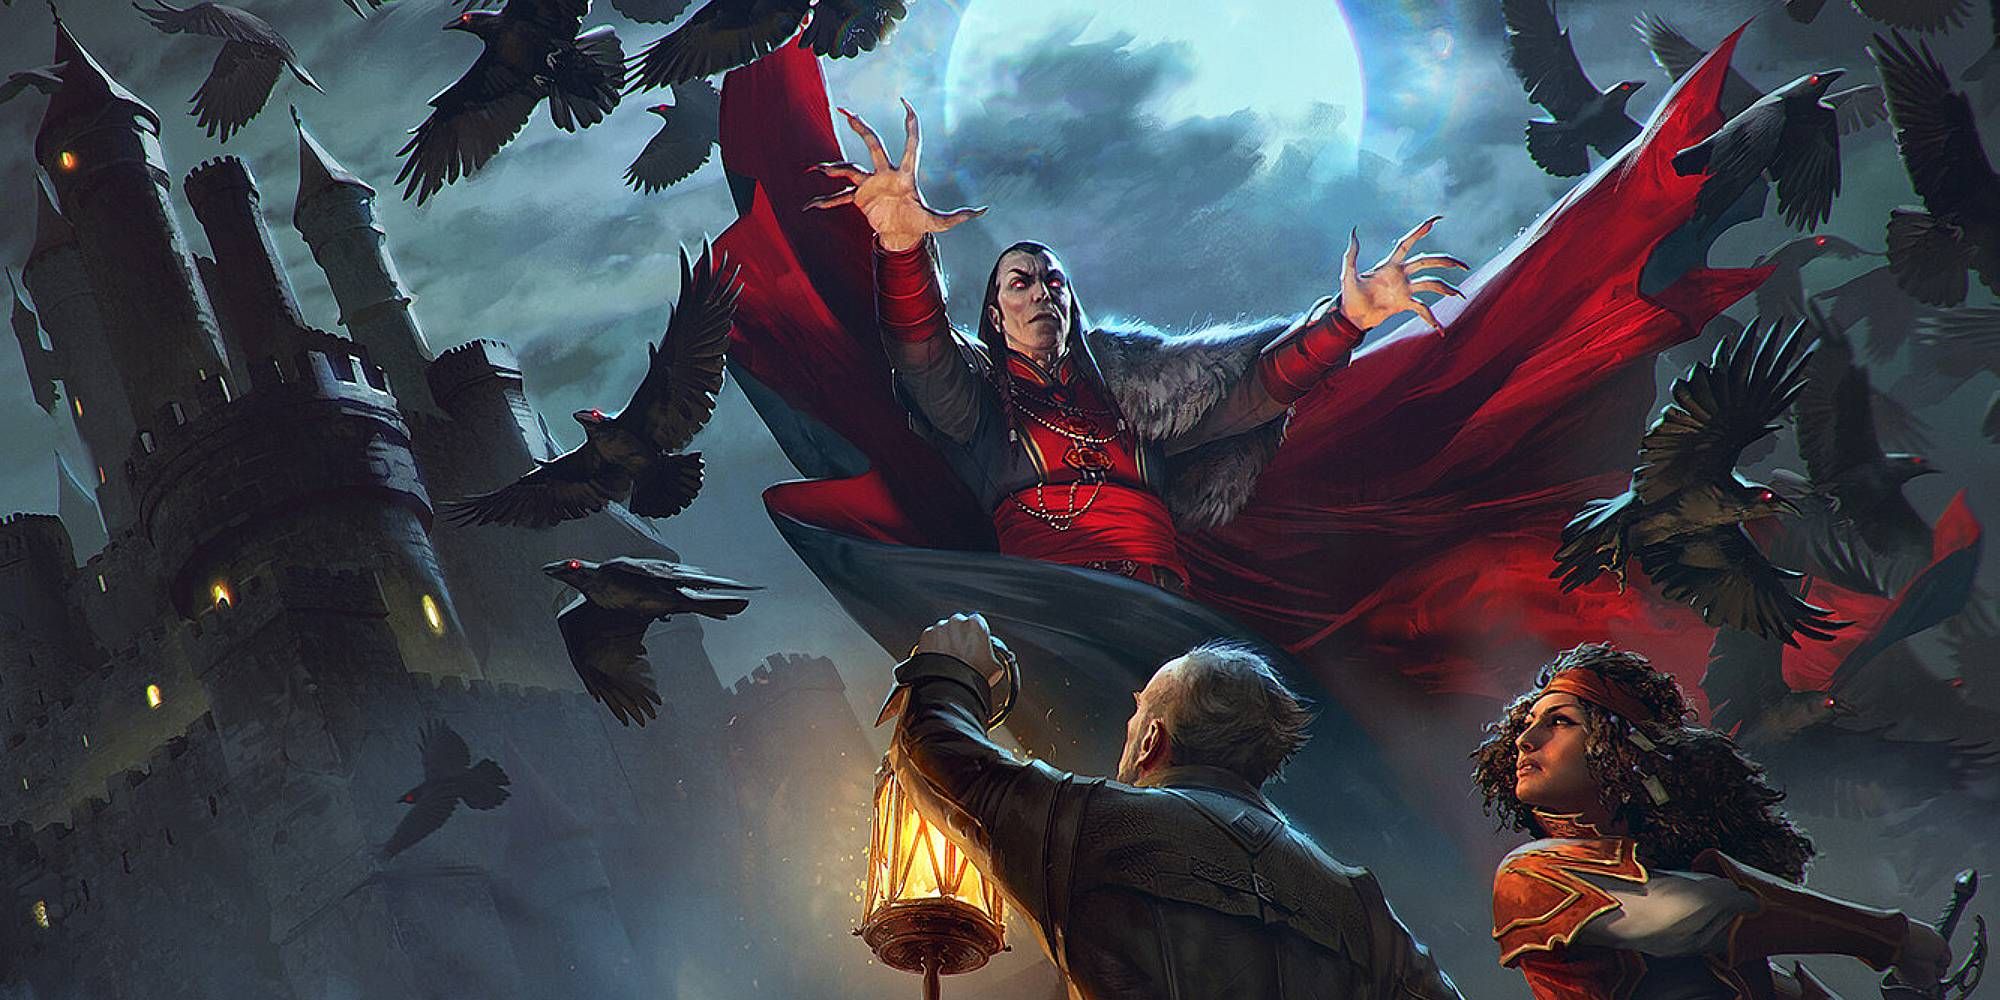 A vampire stands over two humanoids in a dark night as crows fly everywhere